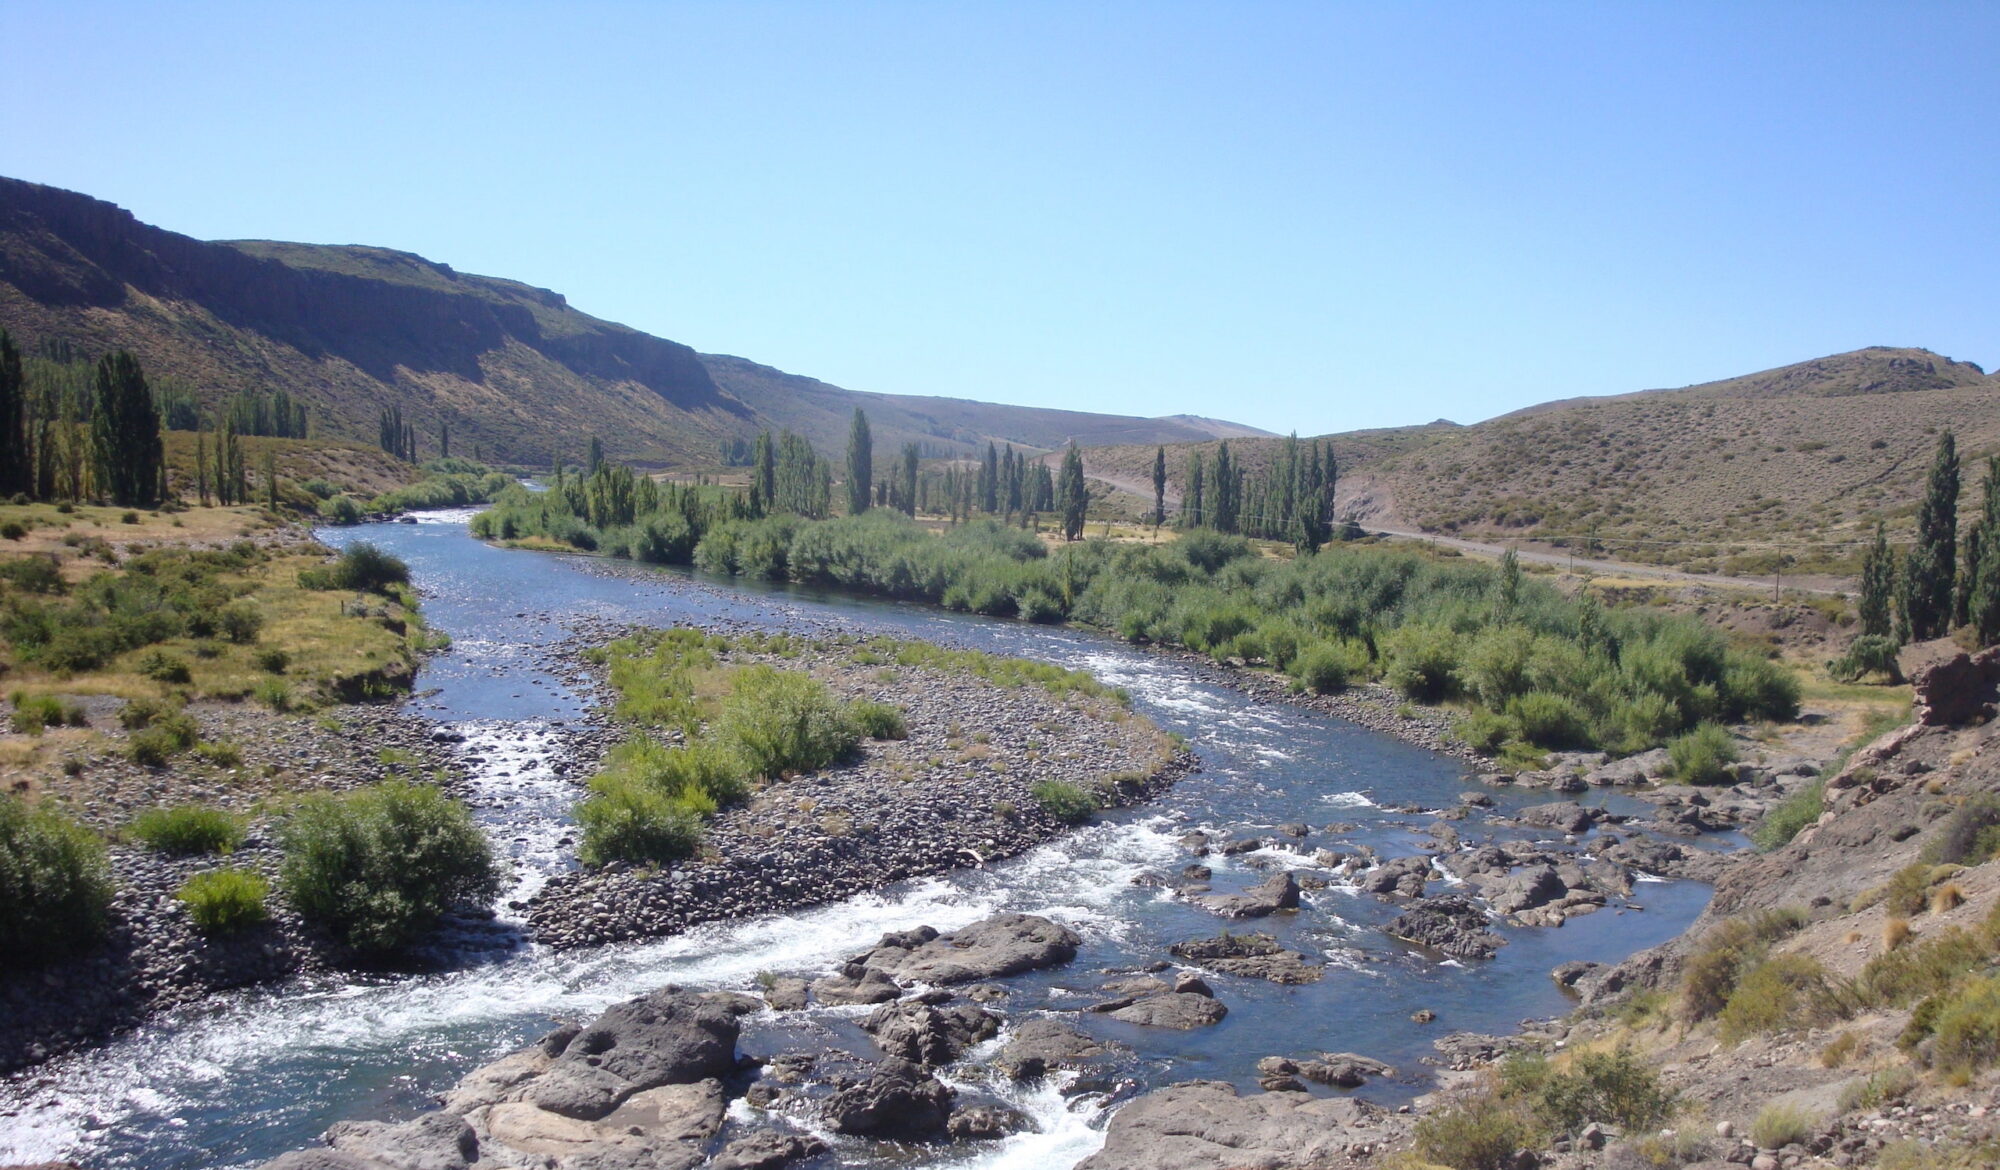 The Nahueve river in Neuquén province, patagonia, Argentina.